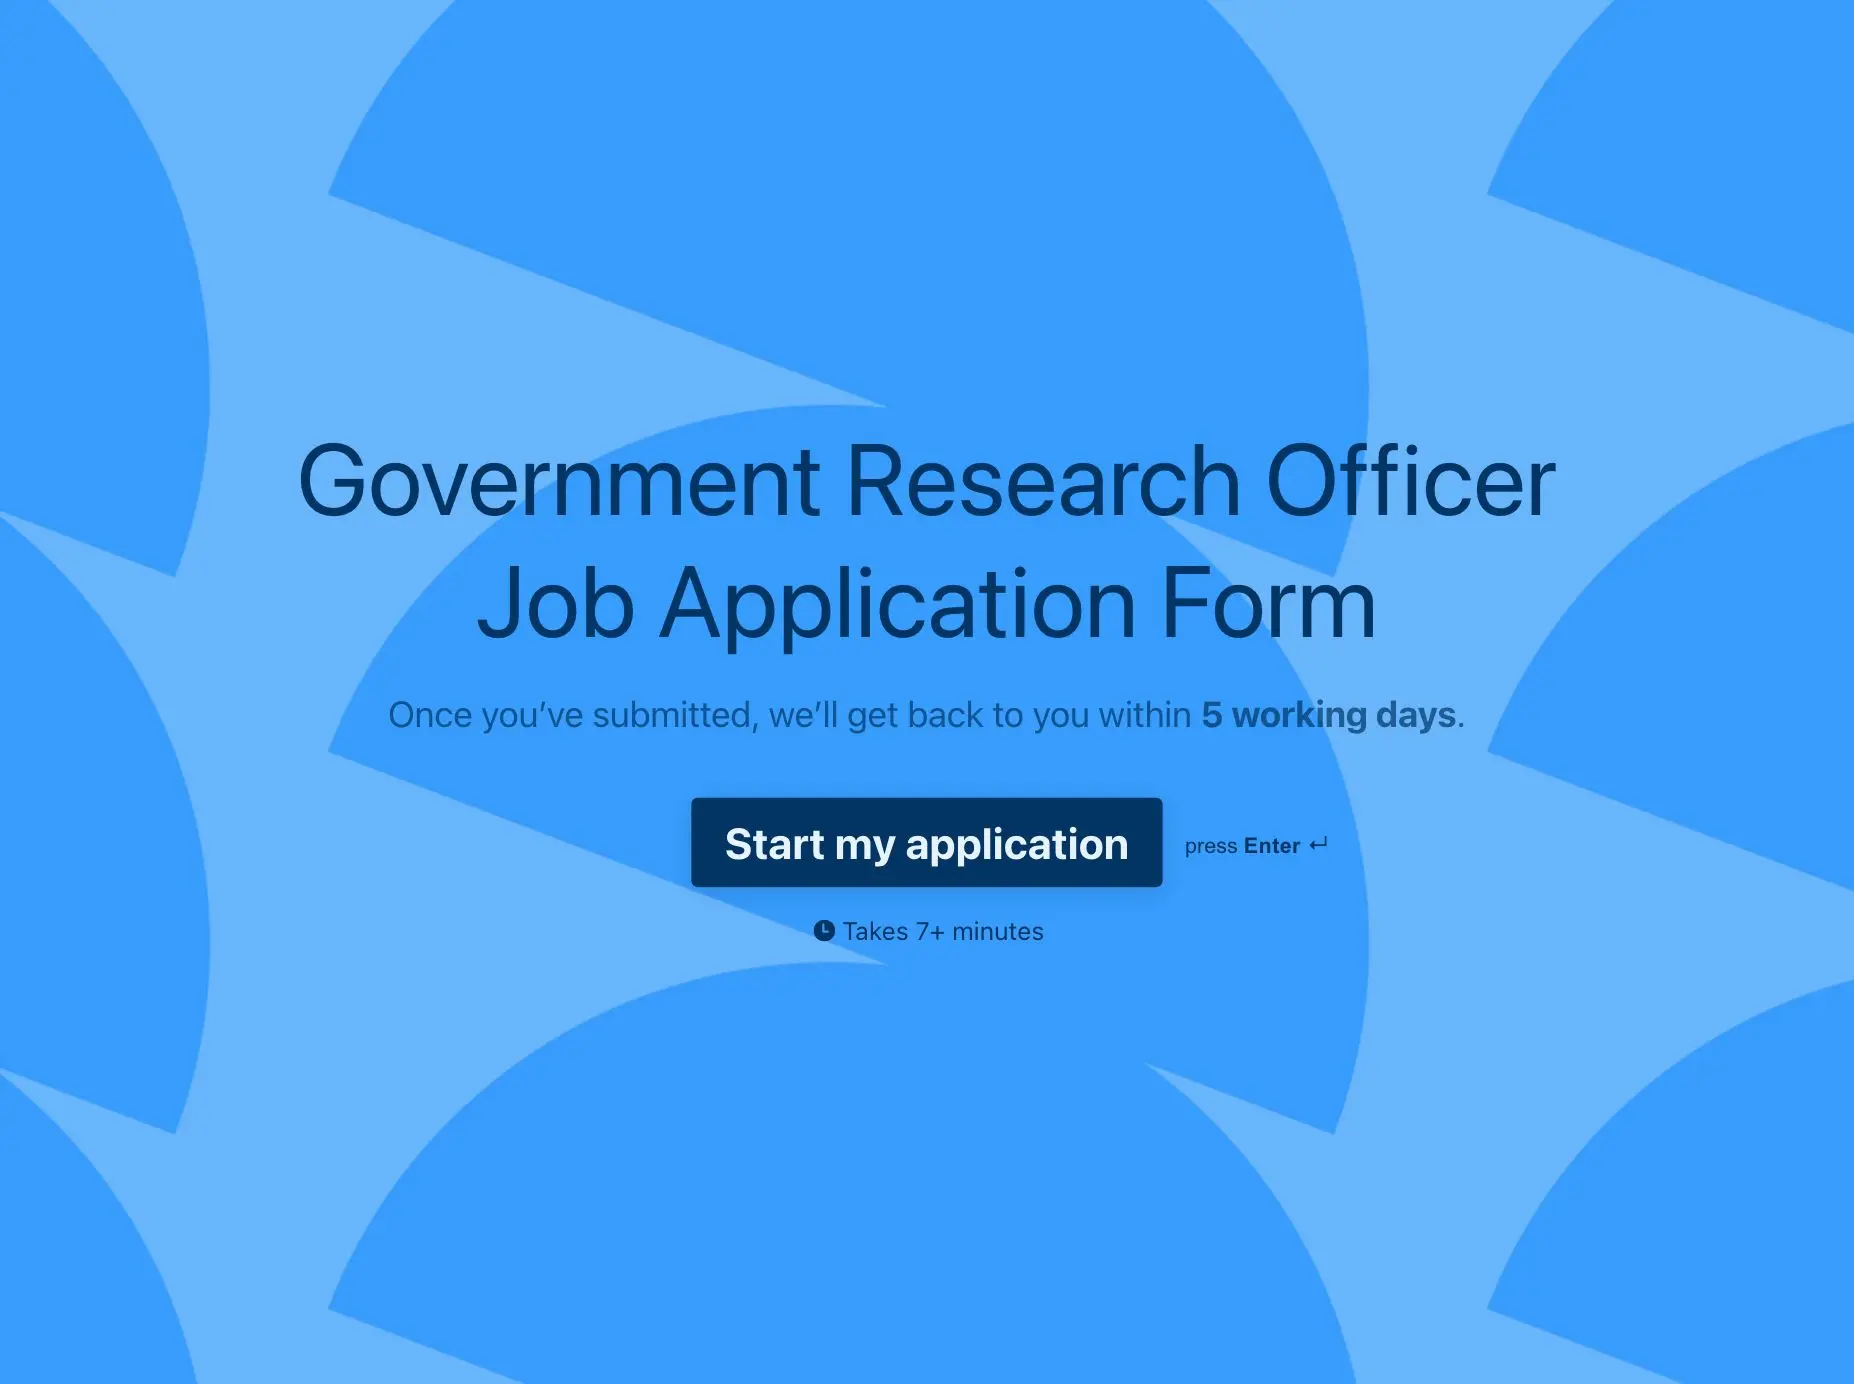 Government Research Officer Job Application Form Template Hero